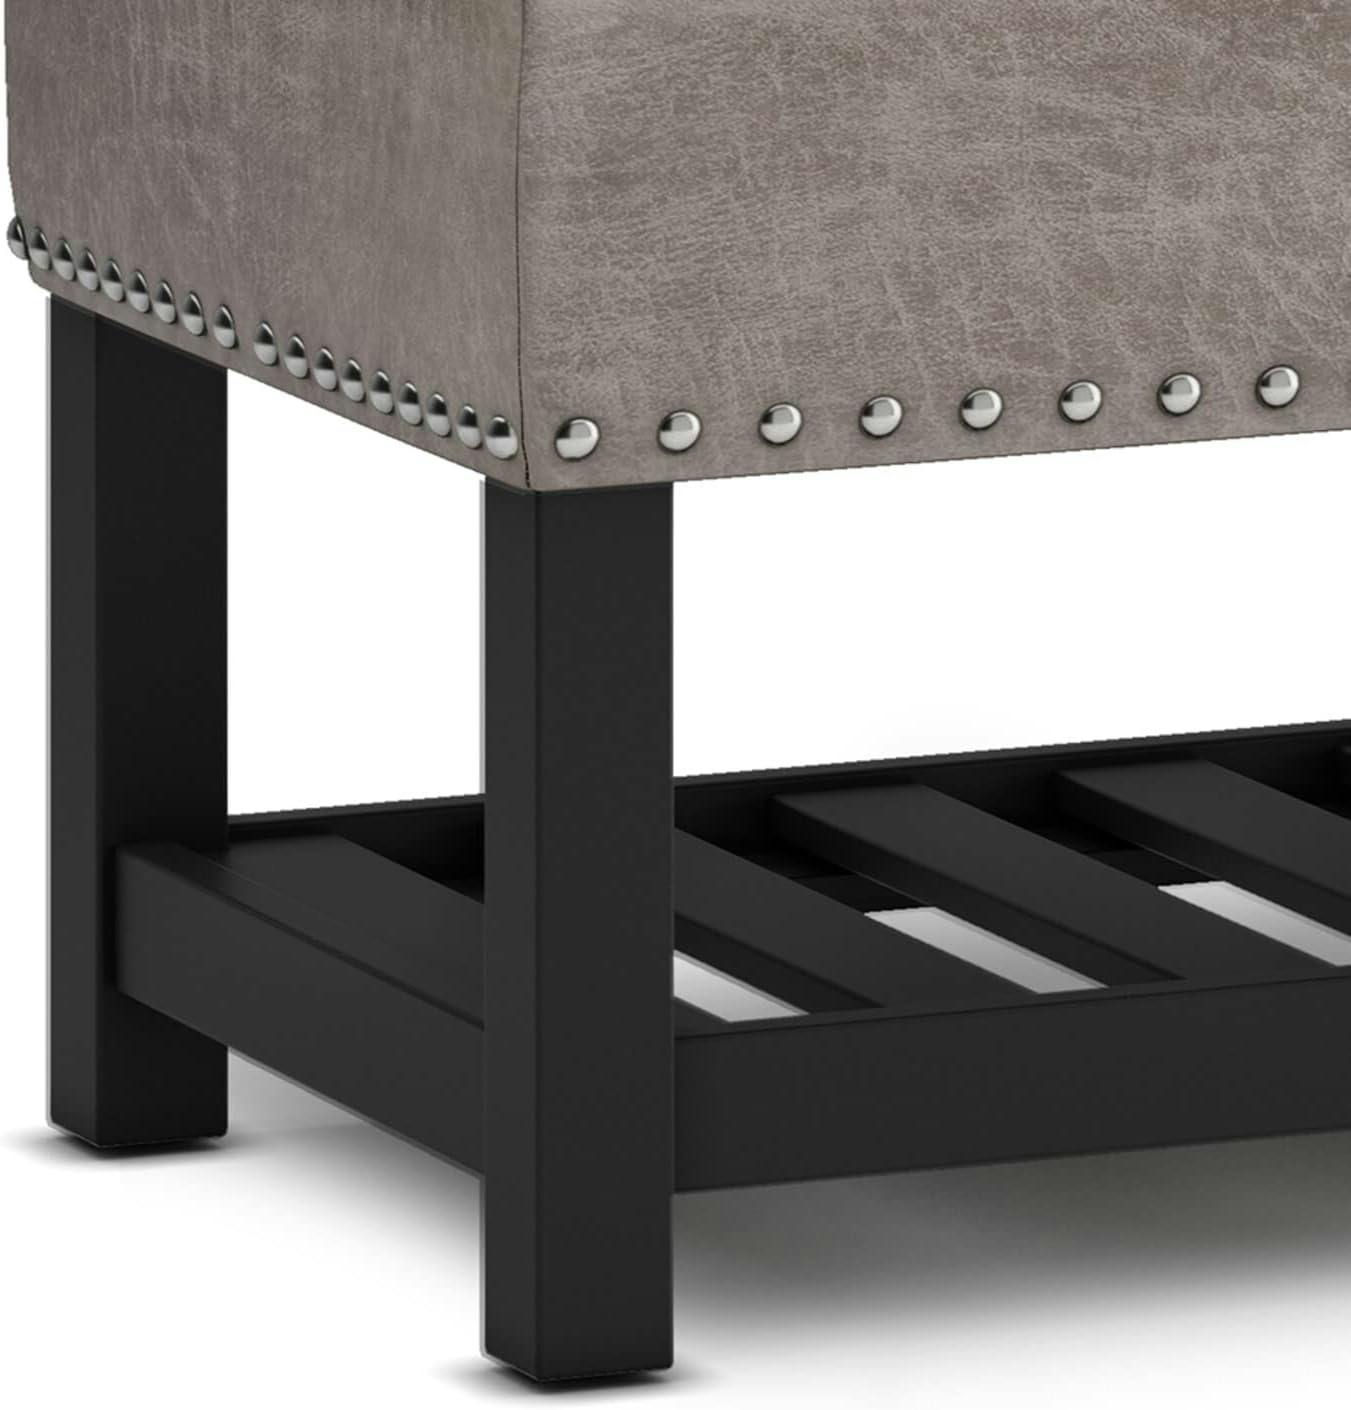 Lomond Distressed Gray Taupe Tufted Storage Ottoman Bench